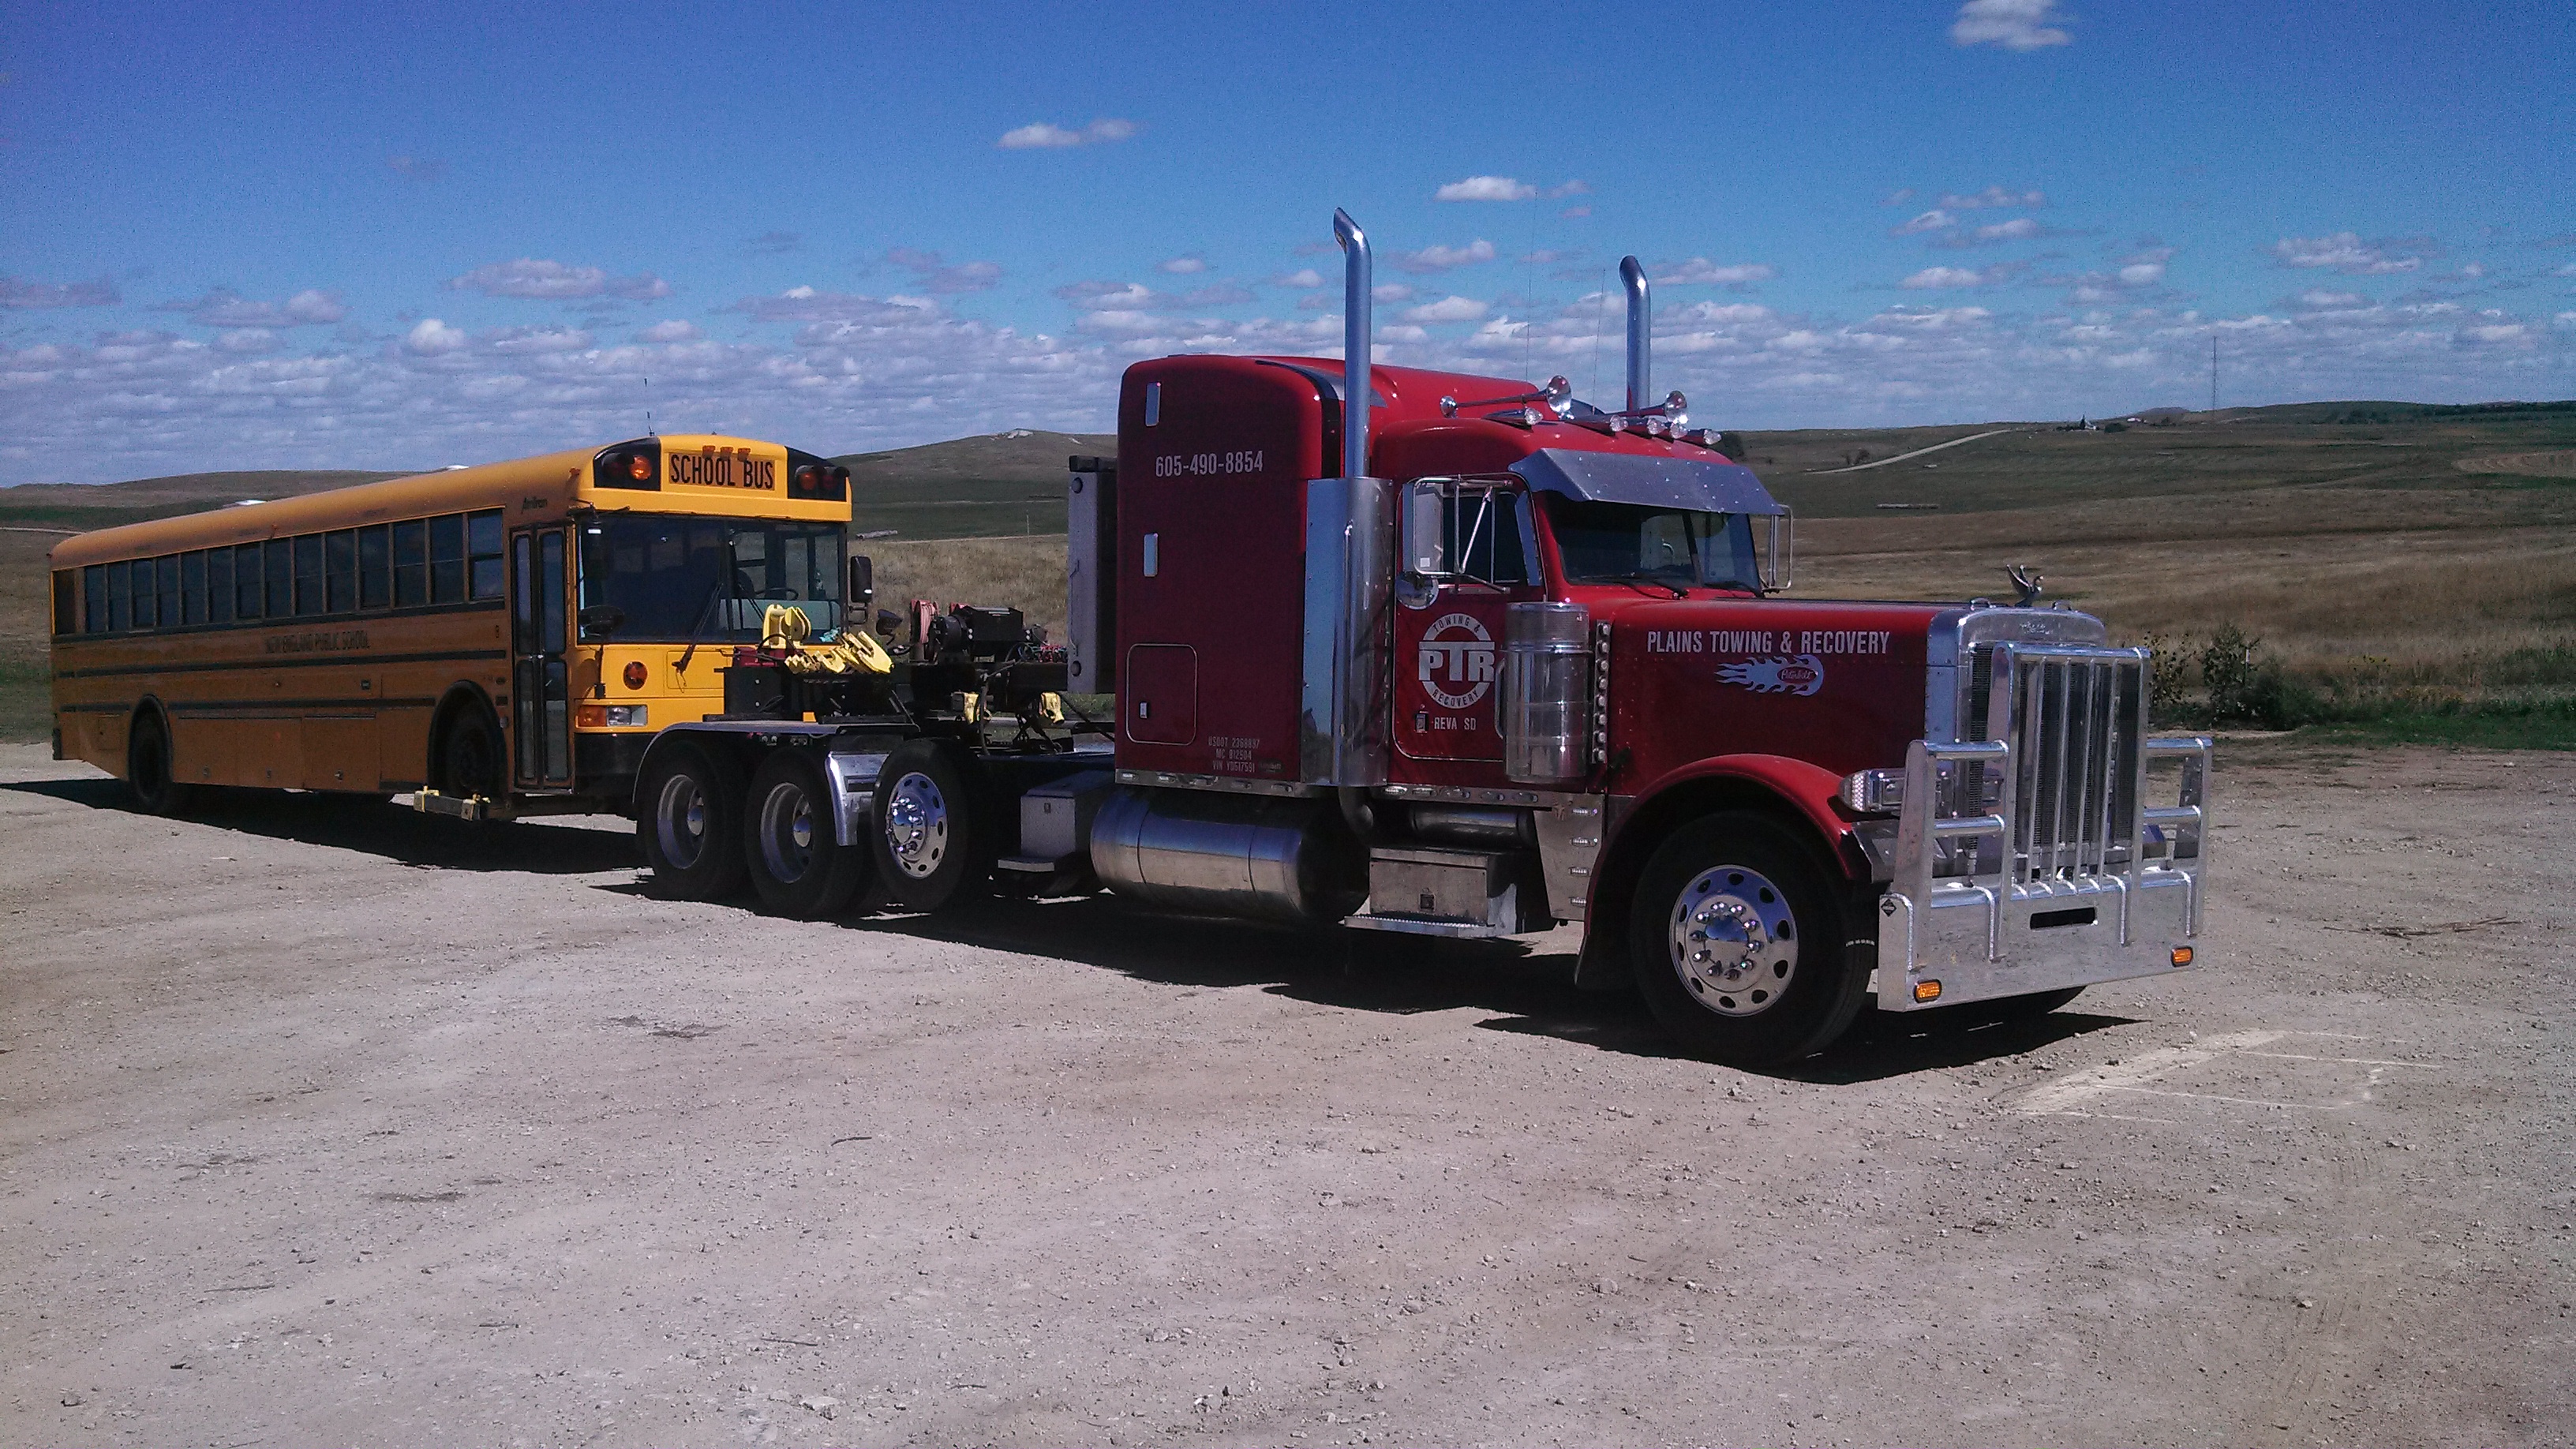 We have been serving Northwestern South Dakota for over 15 years, and are proud to serve all your towing and recovery needs. Large or small we have all the equipment, knowledge and manpower to serve you!  We have built our business with great service, fair pricing and going the extra mile for our customers. We serve 10 counties in 4 states, South Dakota, North Dakota, Wyoming and Montana, We are the preferred towing and recovery choice for law enforcement agencies in our local area, we have earned our relationship with local law enforcement and look forward to earning your trust as well!

Plains Towing and Recovery provides a wide assortment of towing and recovery services that range from towing motorcycles and compact cars to performing full recovery on semis and their trailers. We also proudly work with a number of law enforcement agencies throughout our service area.